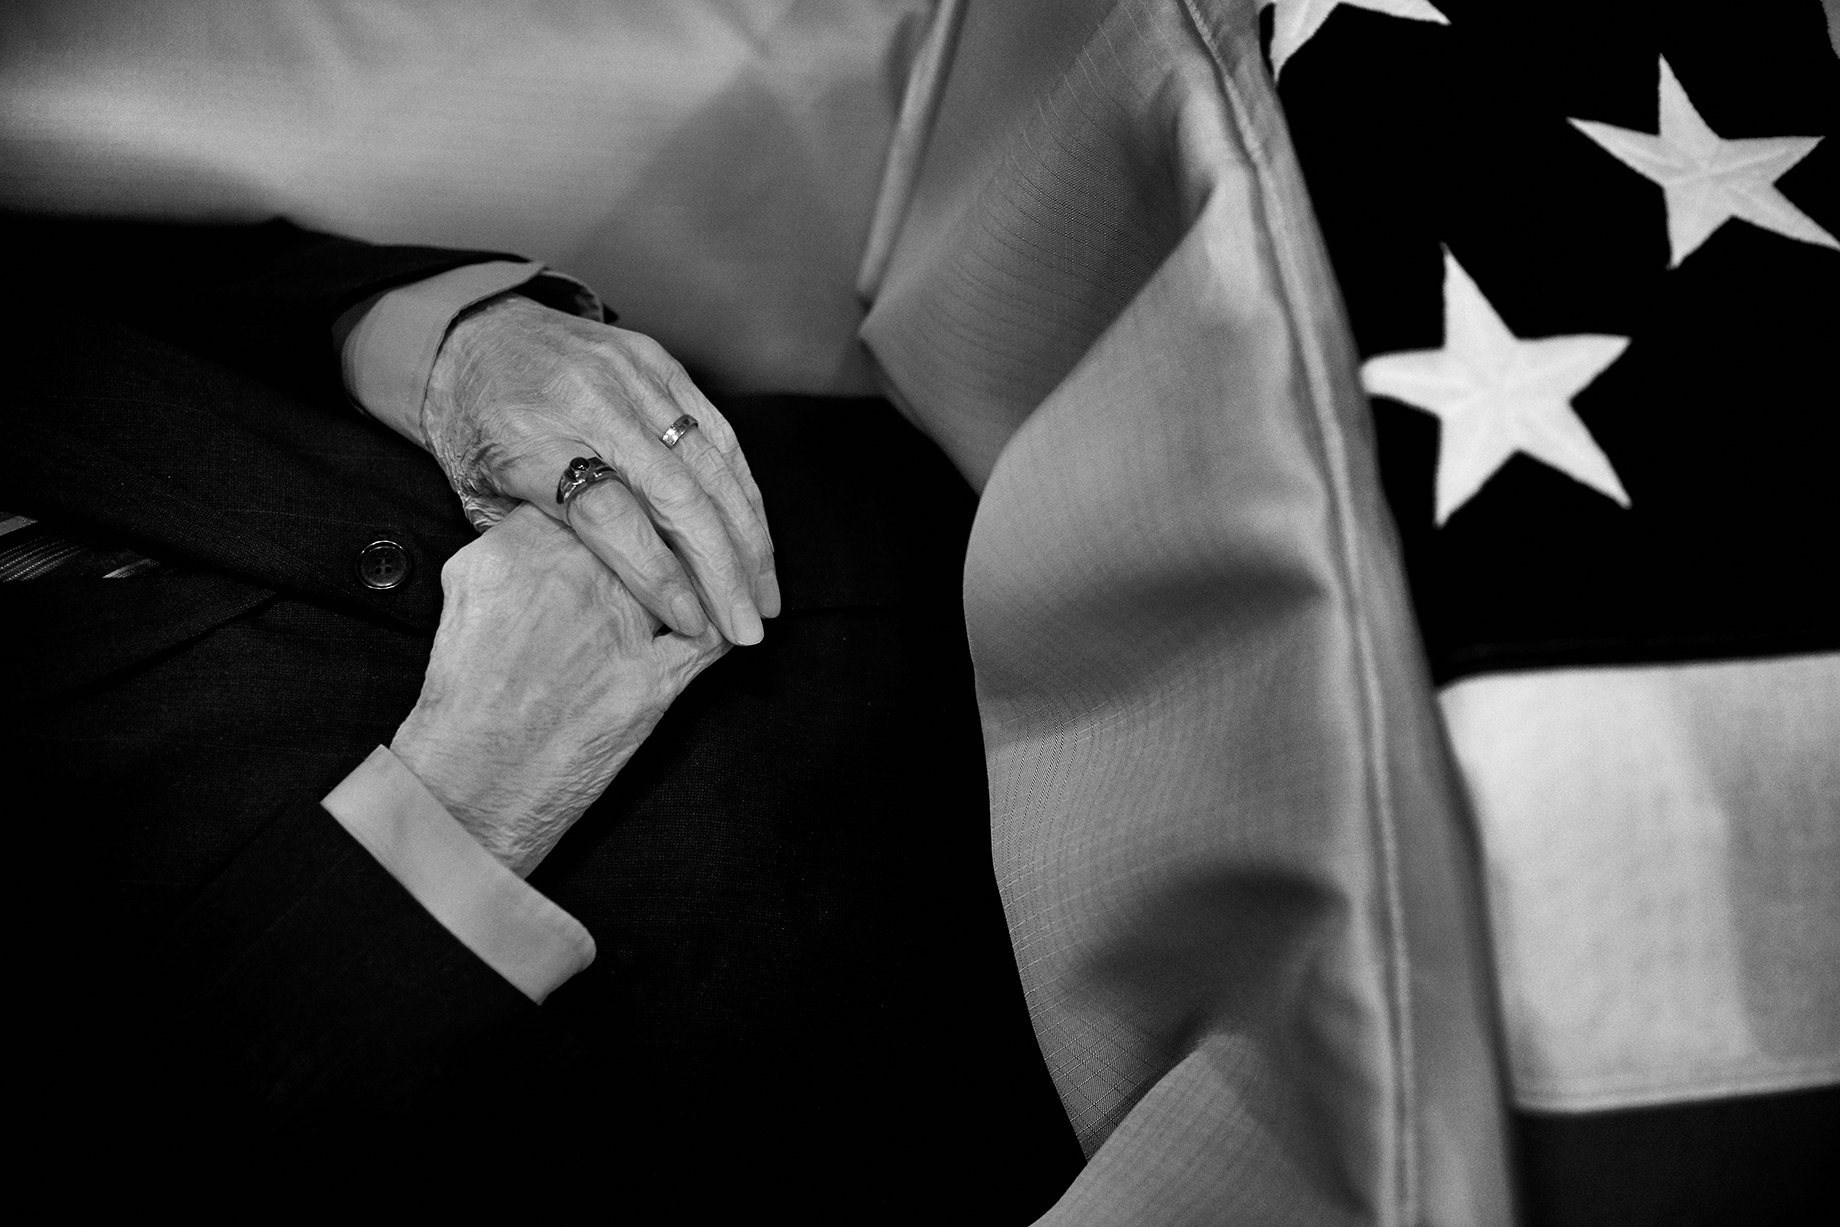 Photographer Sean Scheidt's grandfather's hands in his casket in black and white